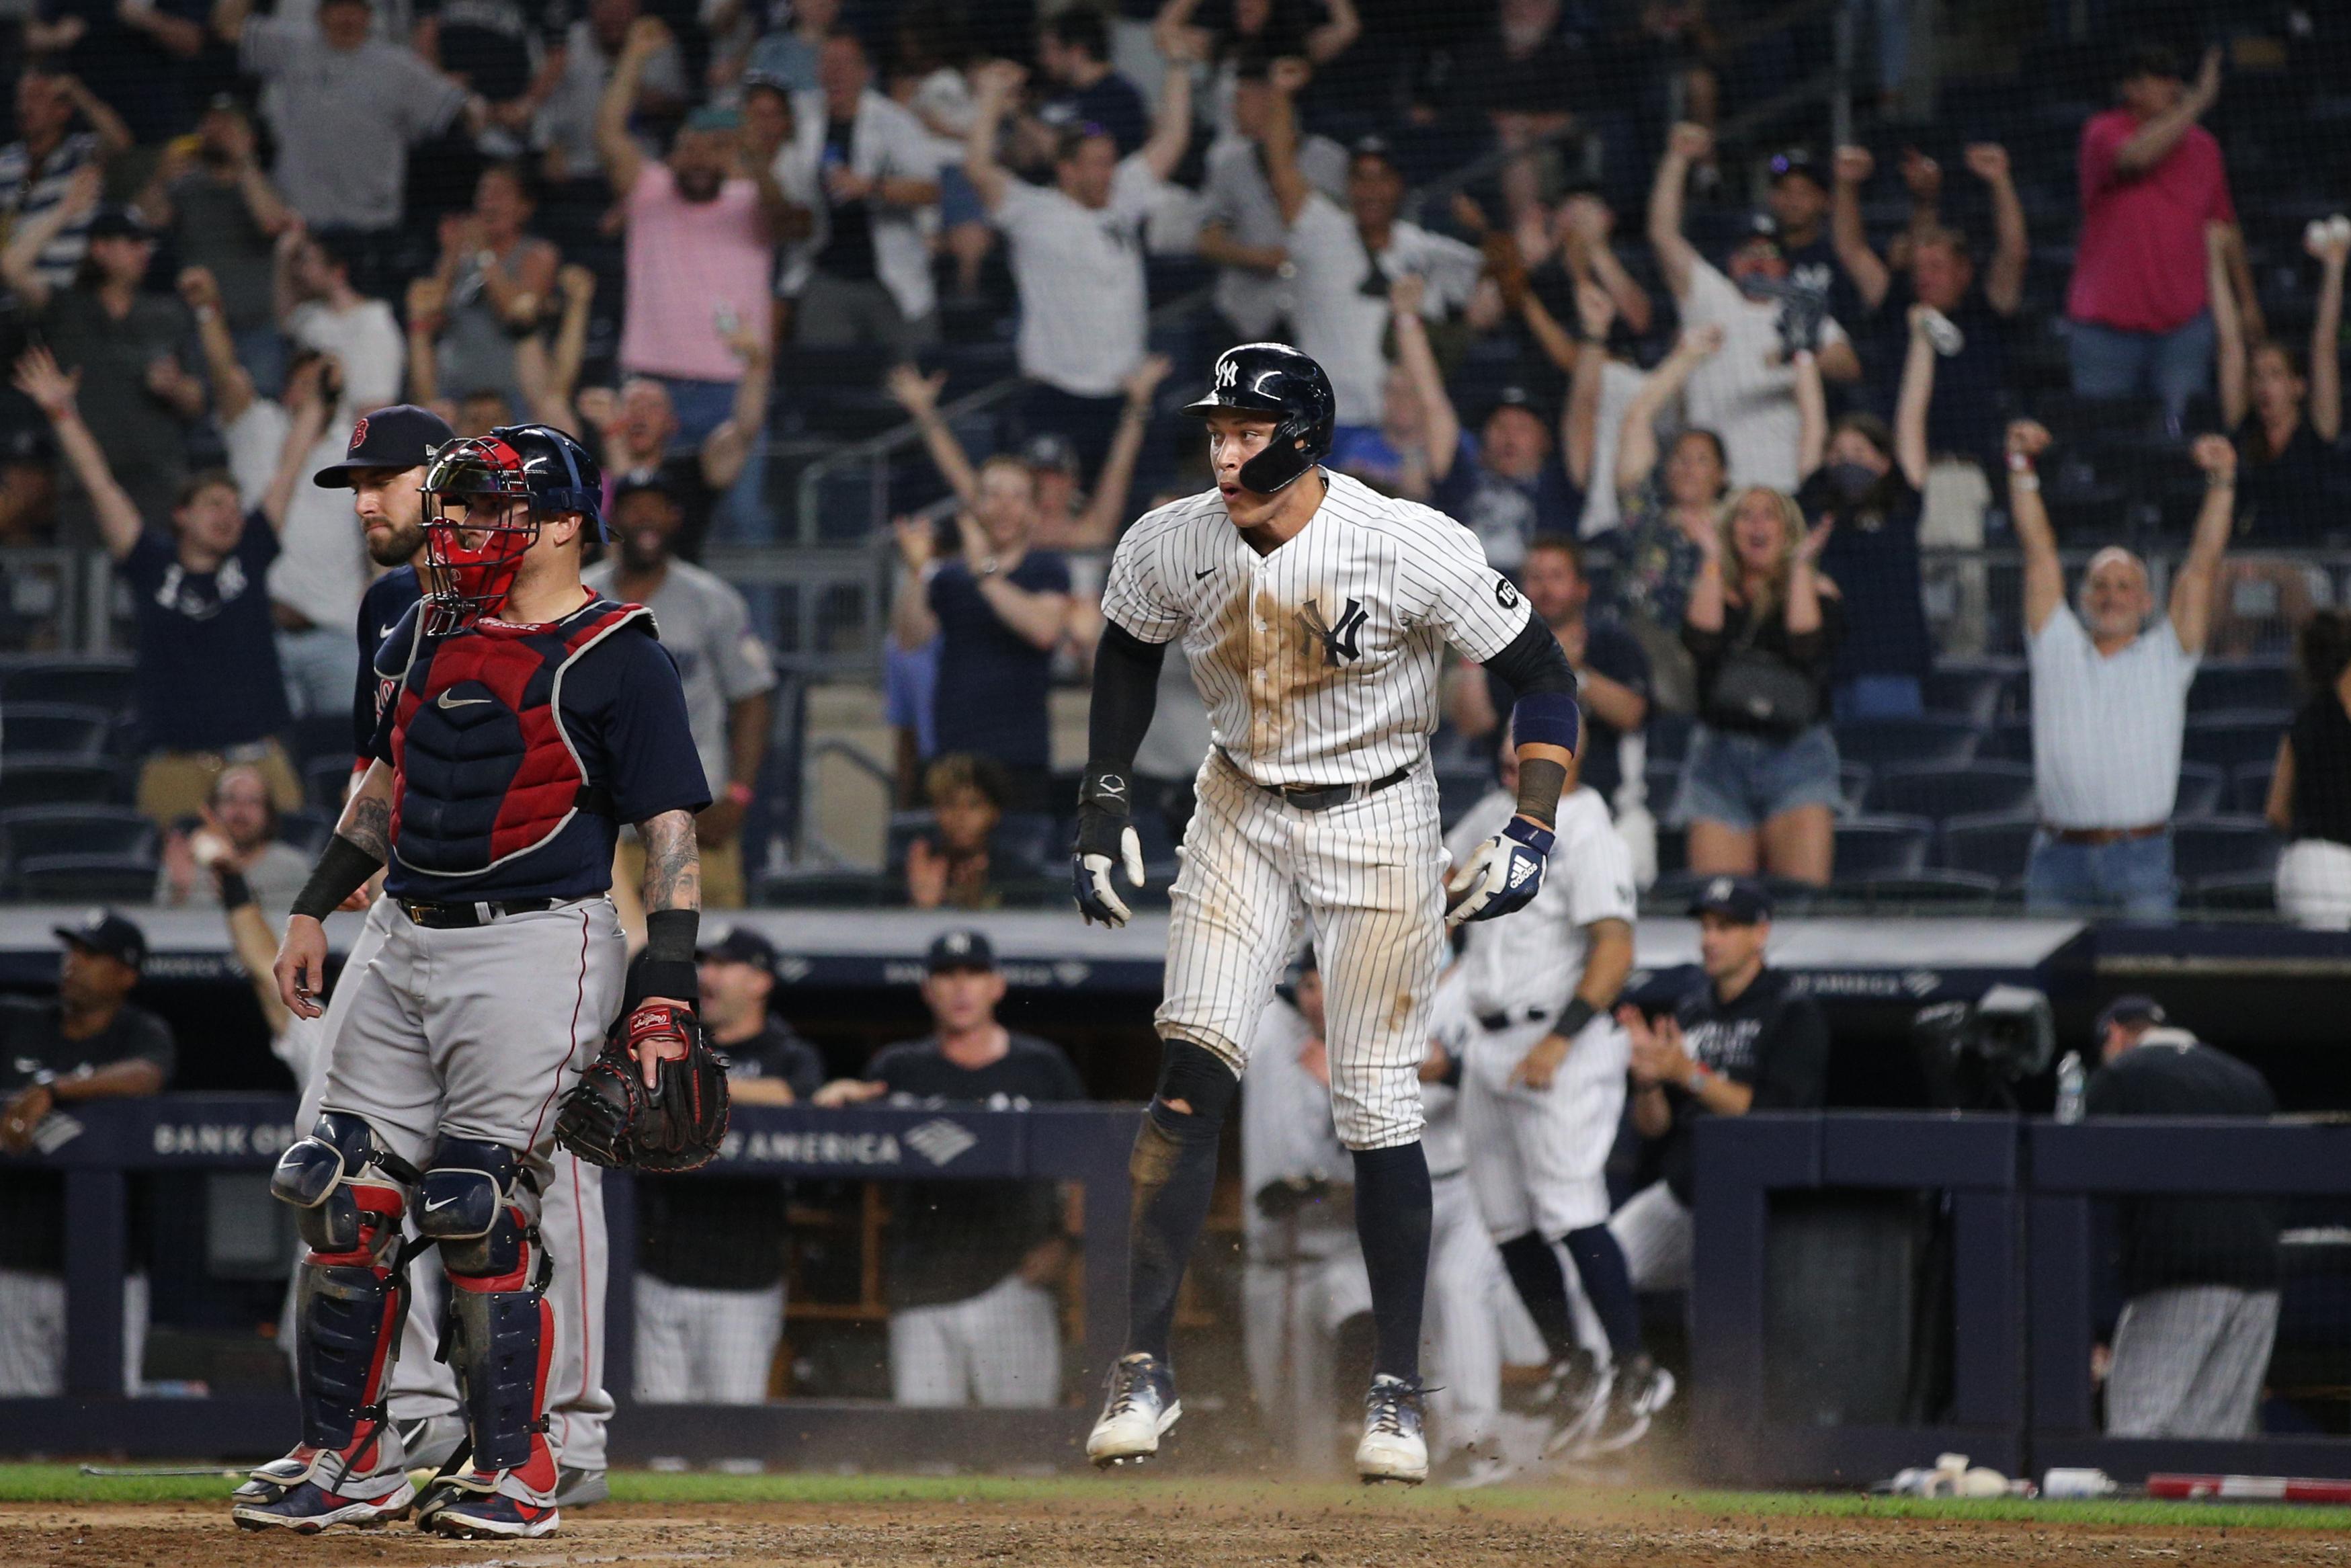 Jun 6, 2021; Bronx, New York, USA; New York Yankees designated hitter Aaron Judge (99) reacts after scoring a run against the Boston Red Sox on a double by Yankees shortstop Gleyber Torres (not pictured) during the ninth inning at Yankee Stadium. / © Brad Penner-USA TODAY Sports